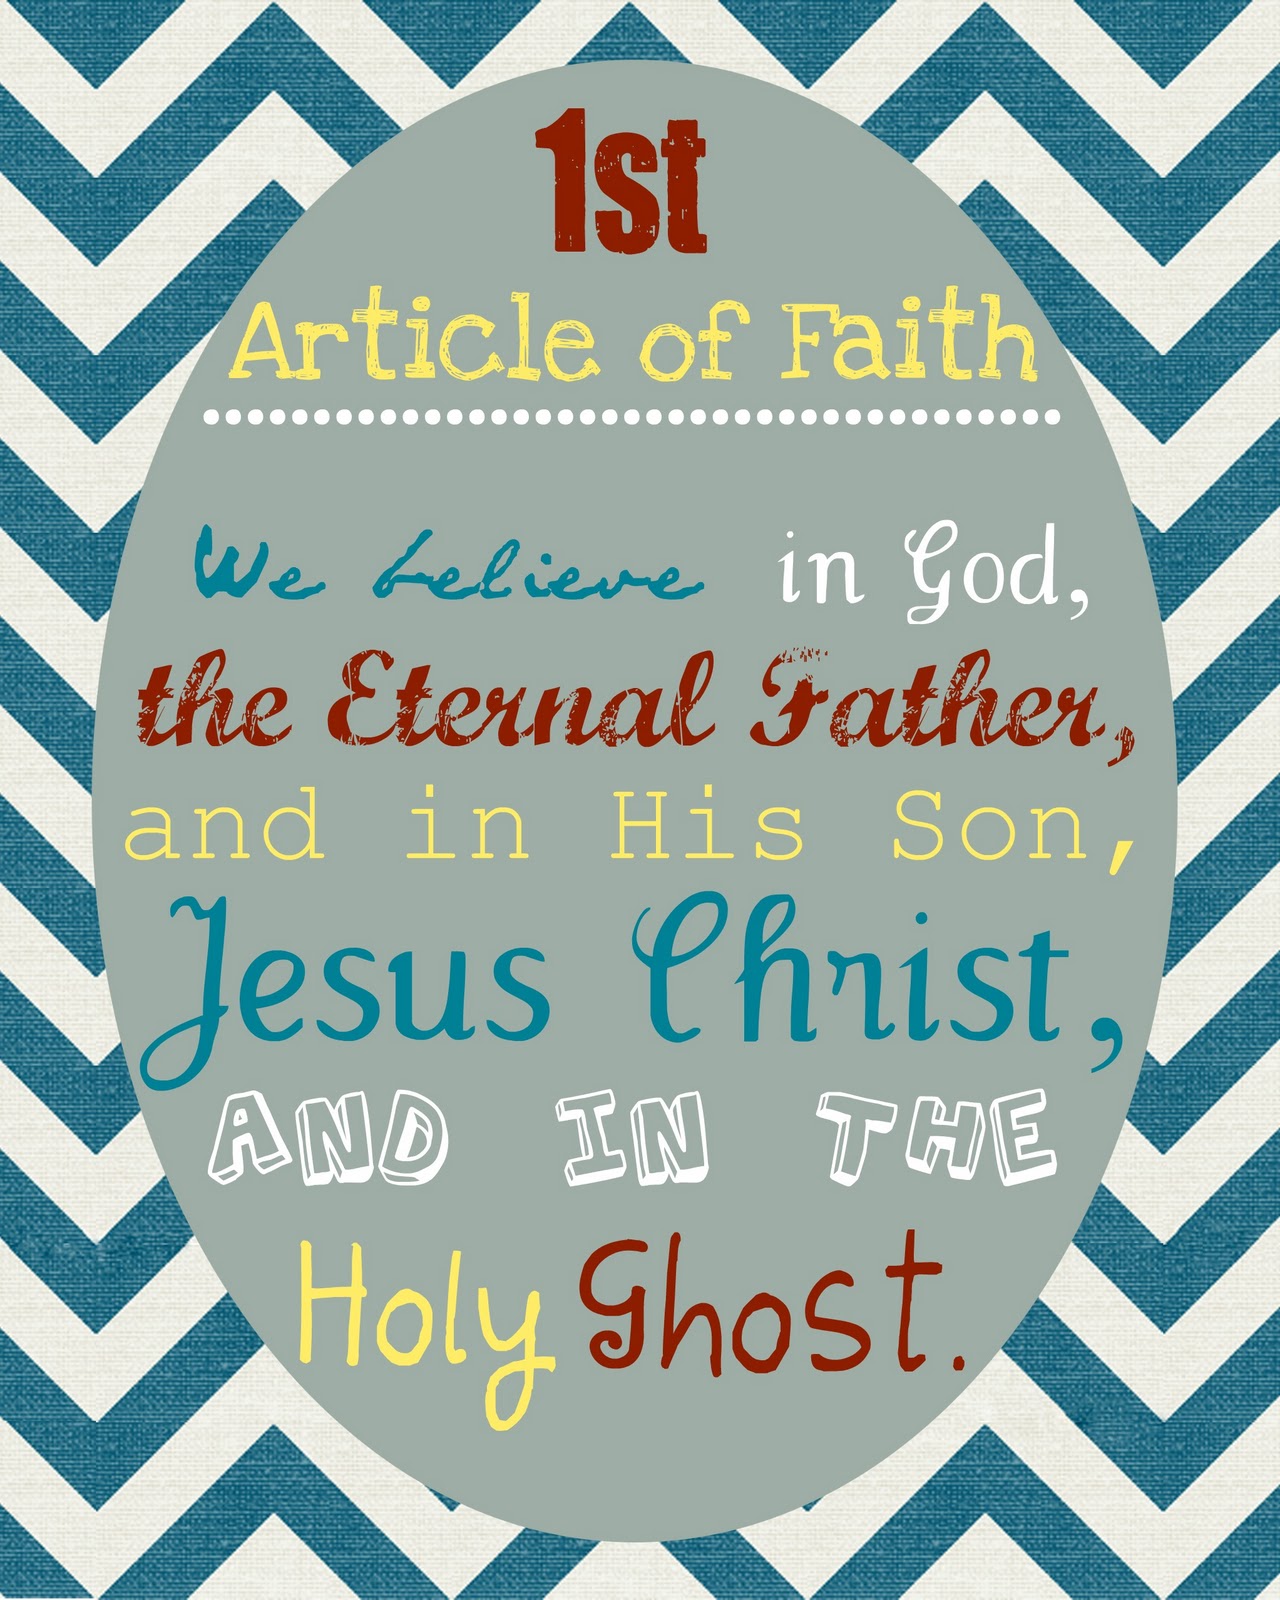 7 Best Images of First Article Of Faith Printable 13 Articles of